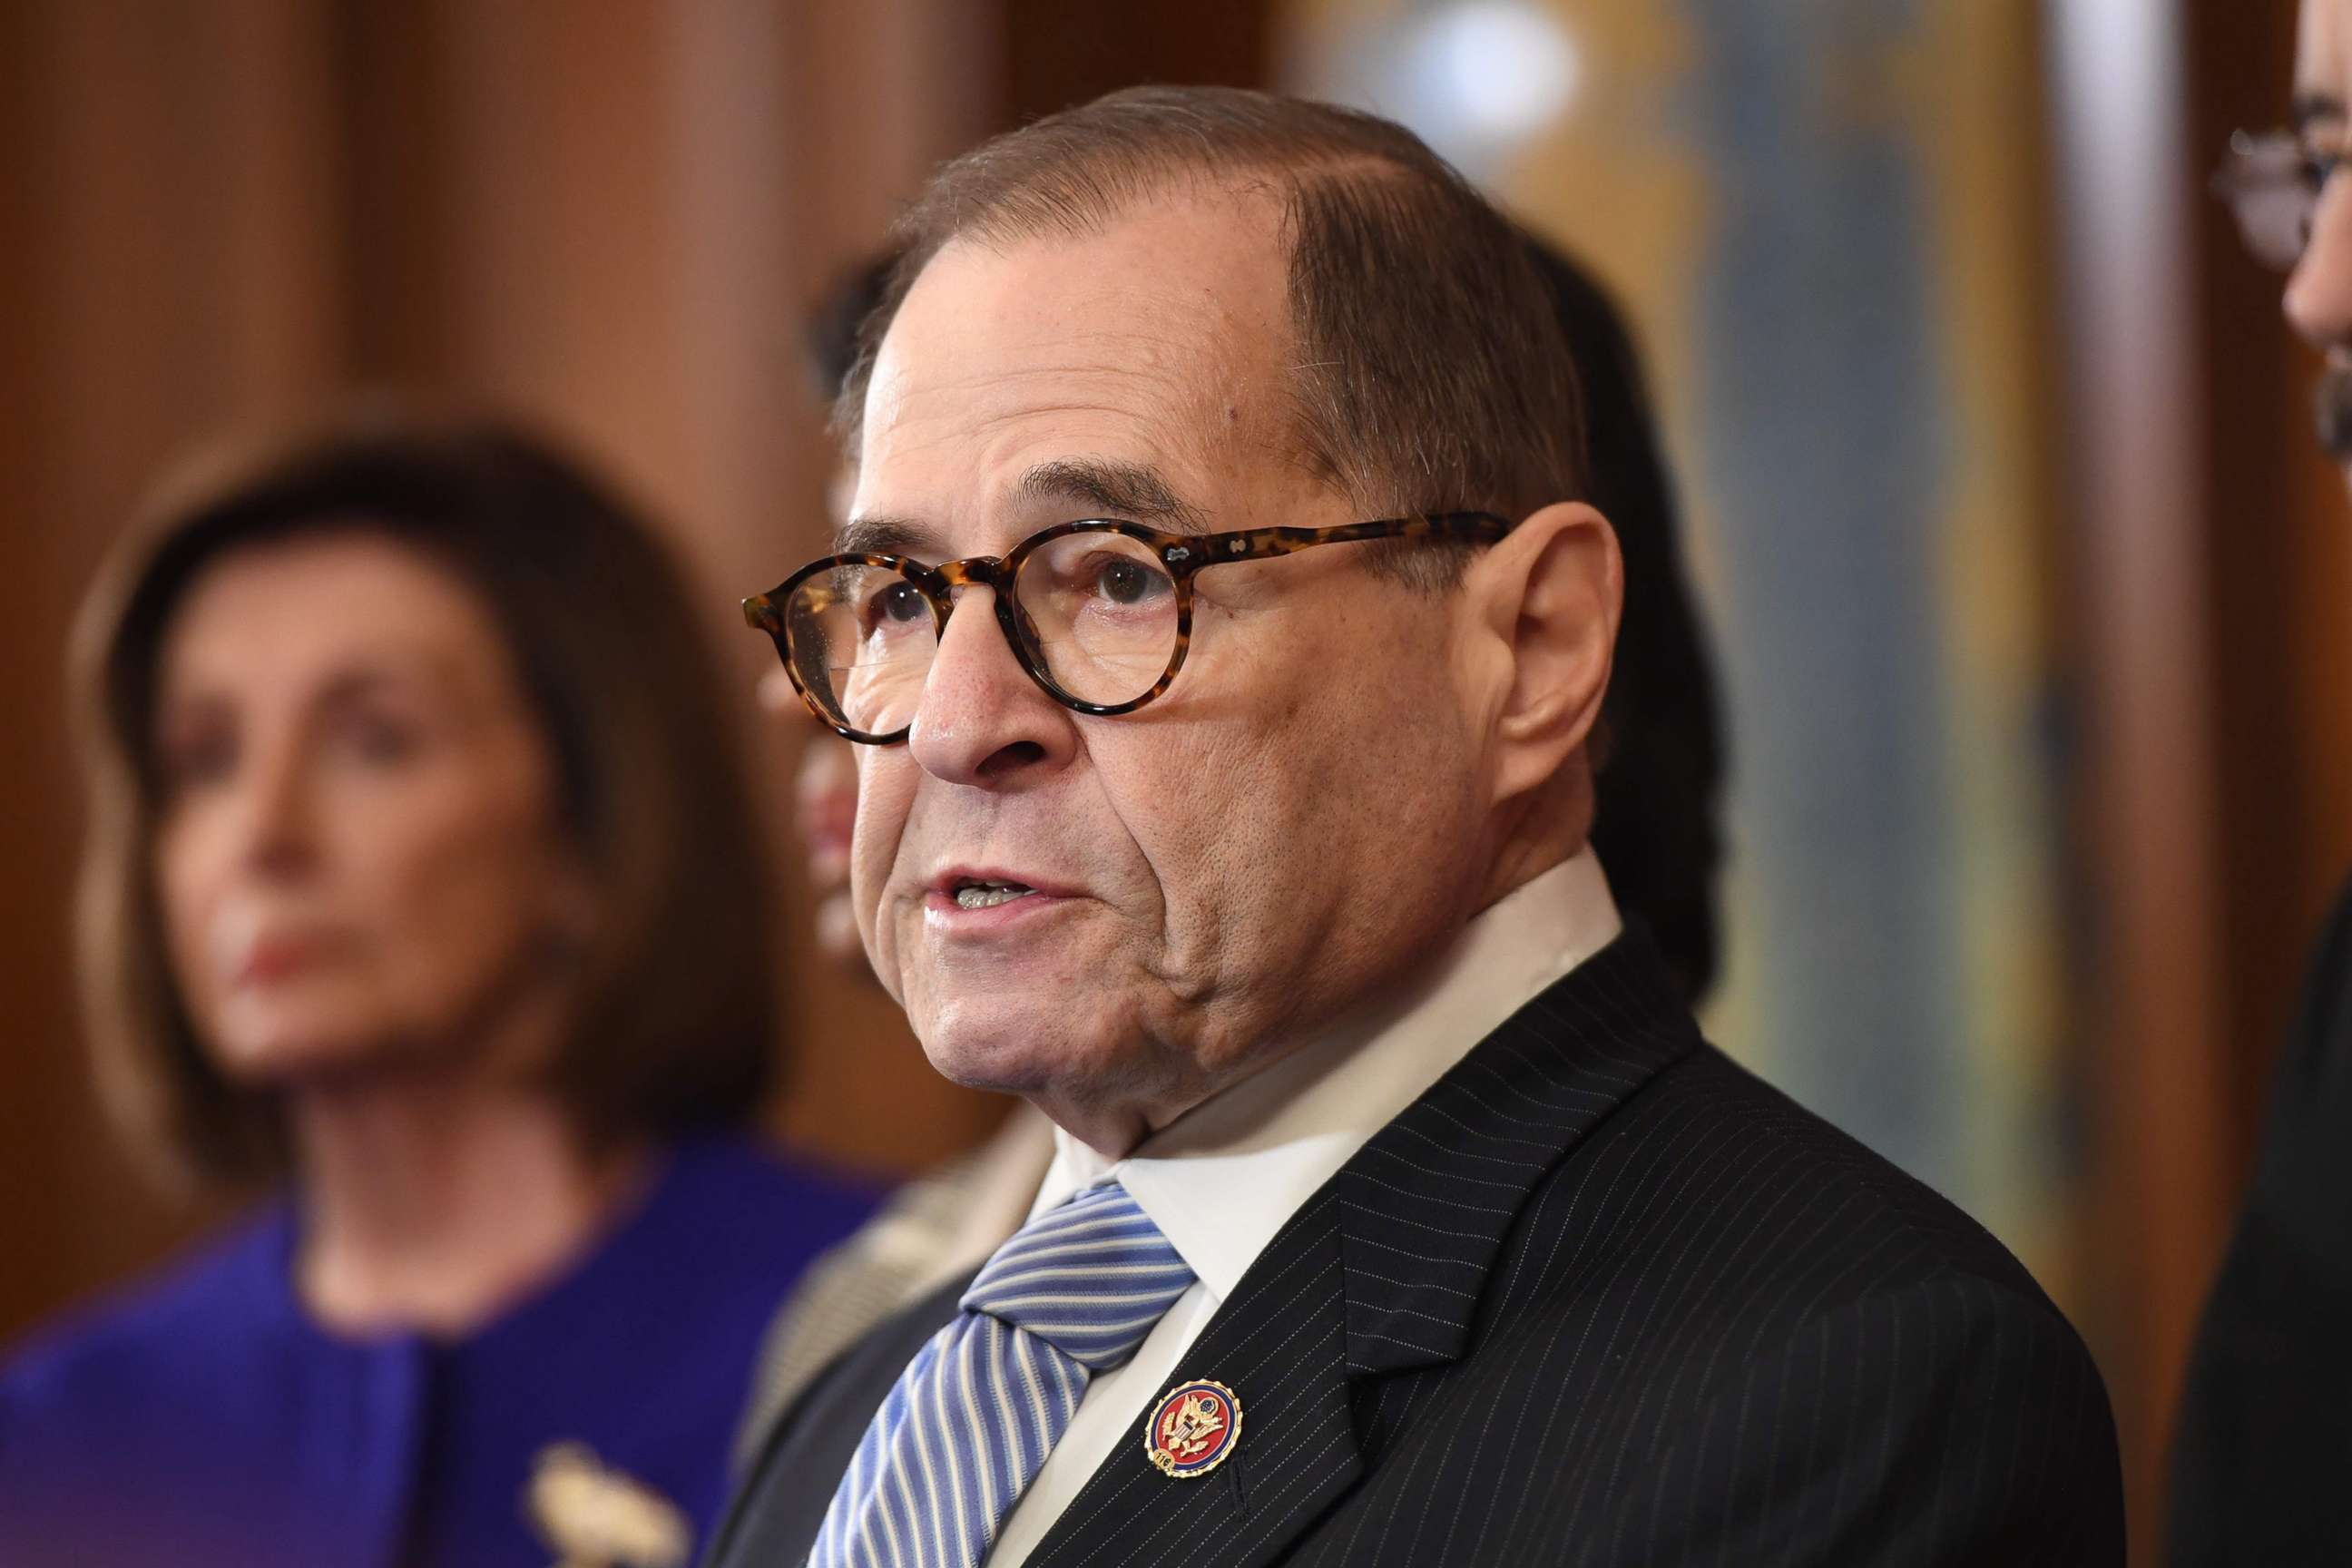 PHOTO: House Judiciary Chairman Jerry Nadler speaks during a press conference at the US Capitol in Washington, D.C, Dec. 10, 2019.